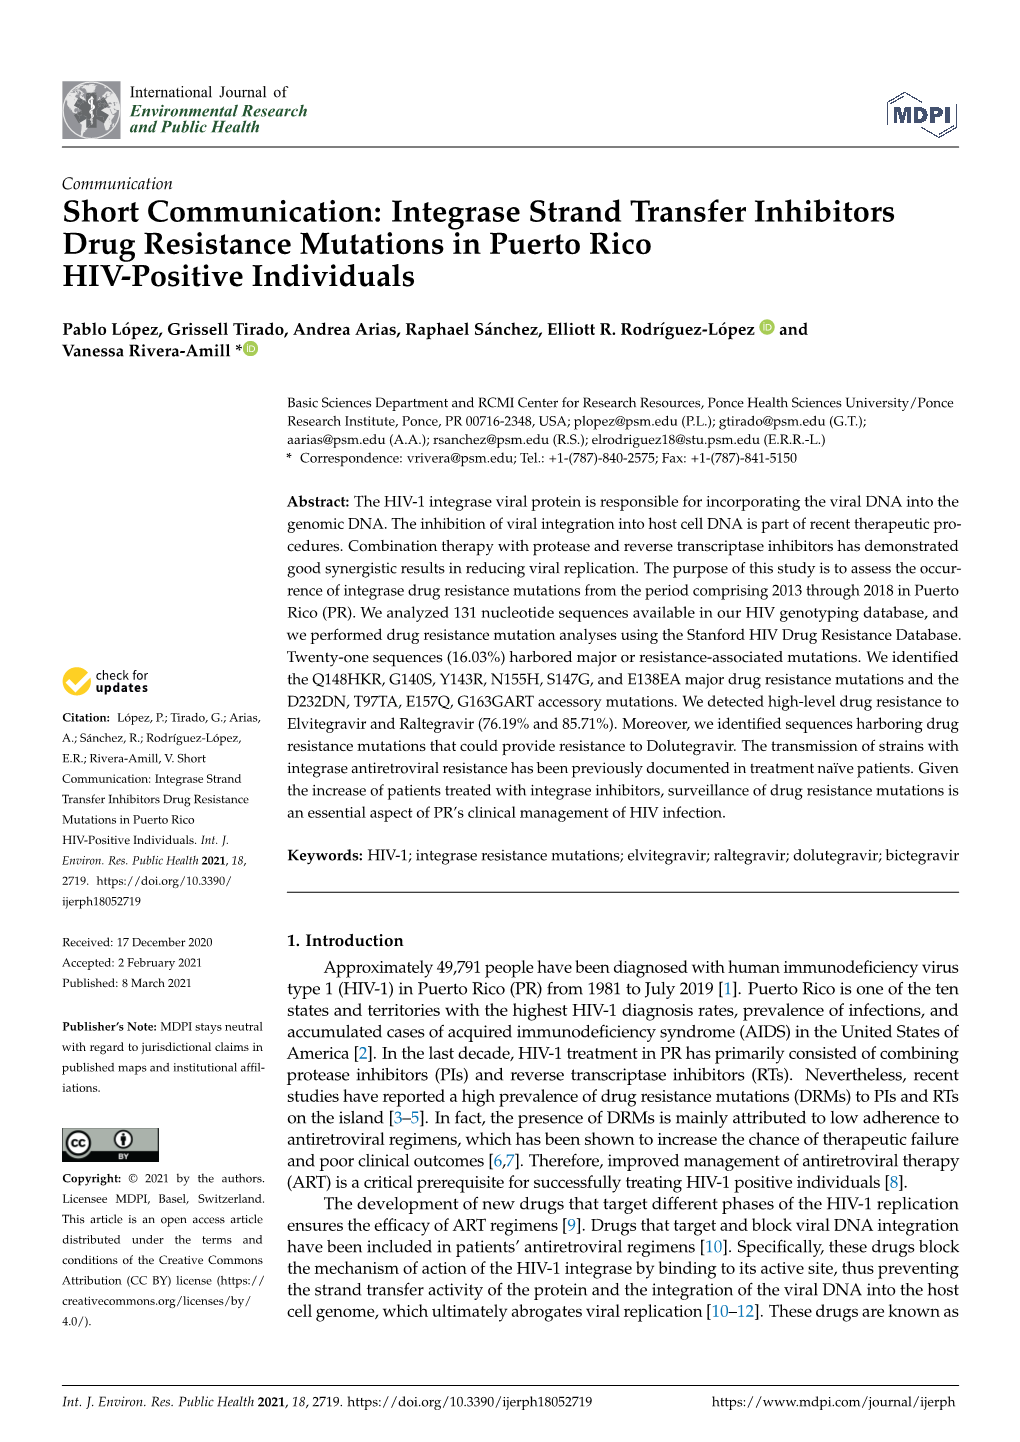 Integrase Strand Transfer Inhibitors Drug Resistance Mutations in Puerto Rico HIV-Positive Individuals